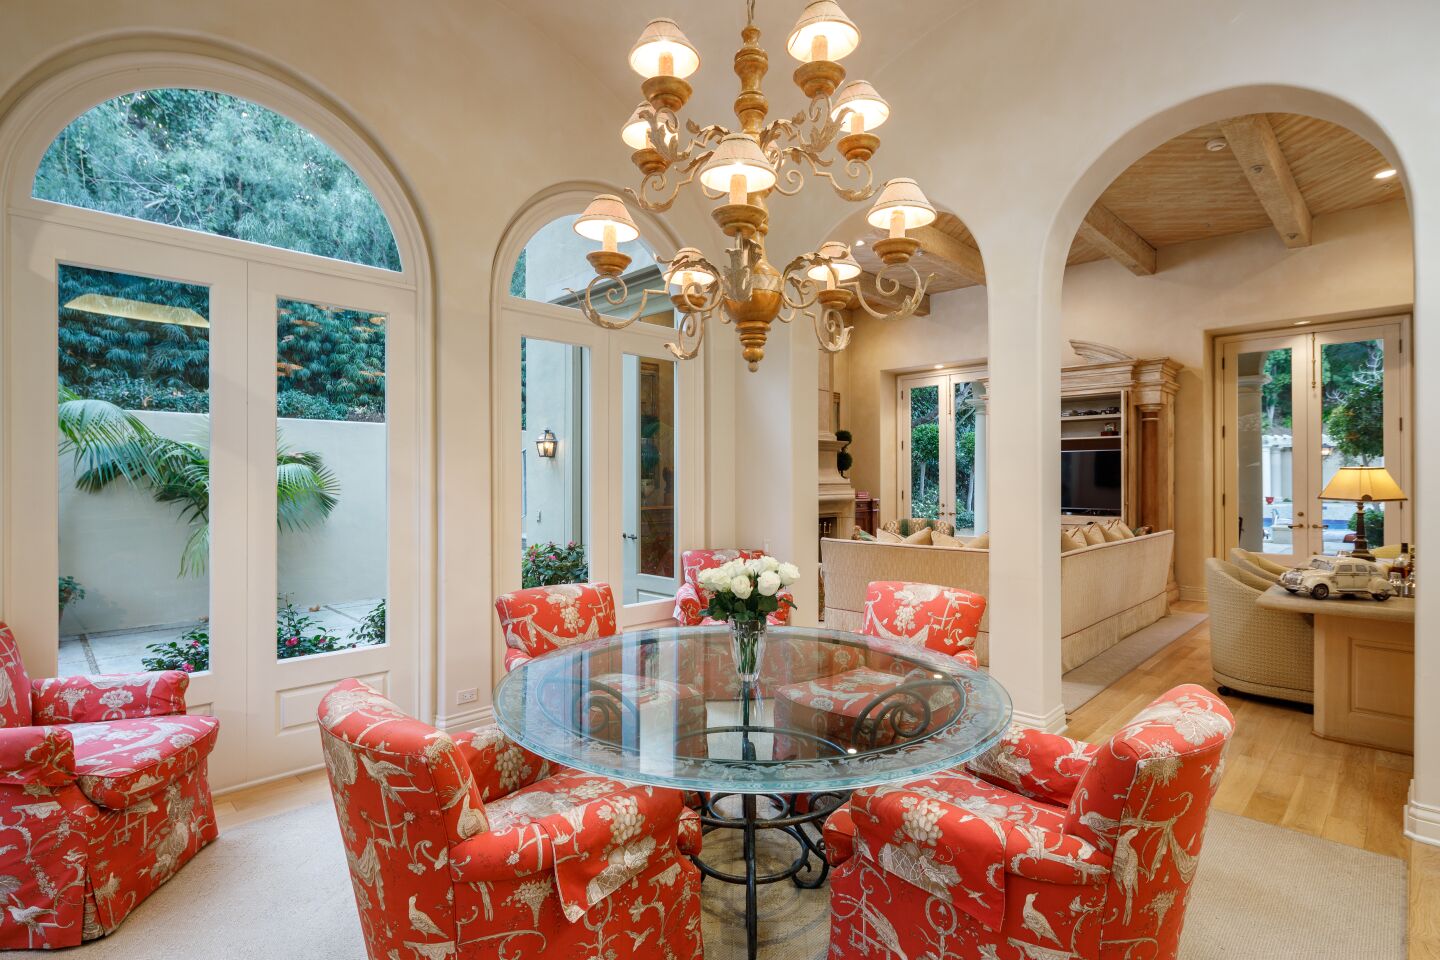 A breakfast room sits off the family room and kitchen.